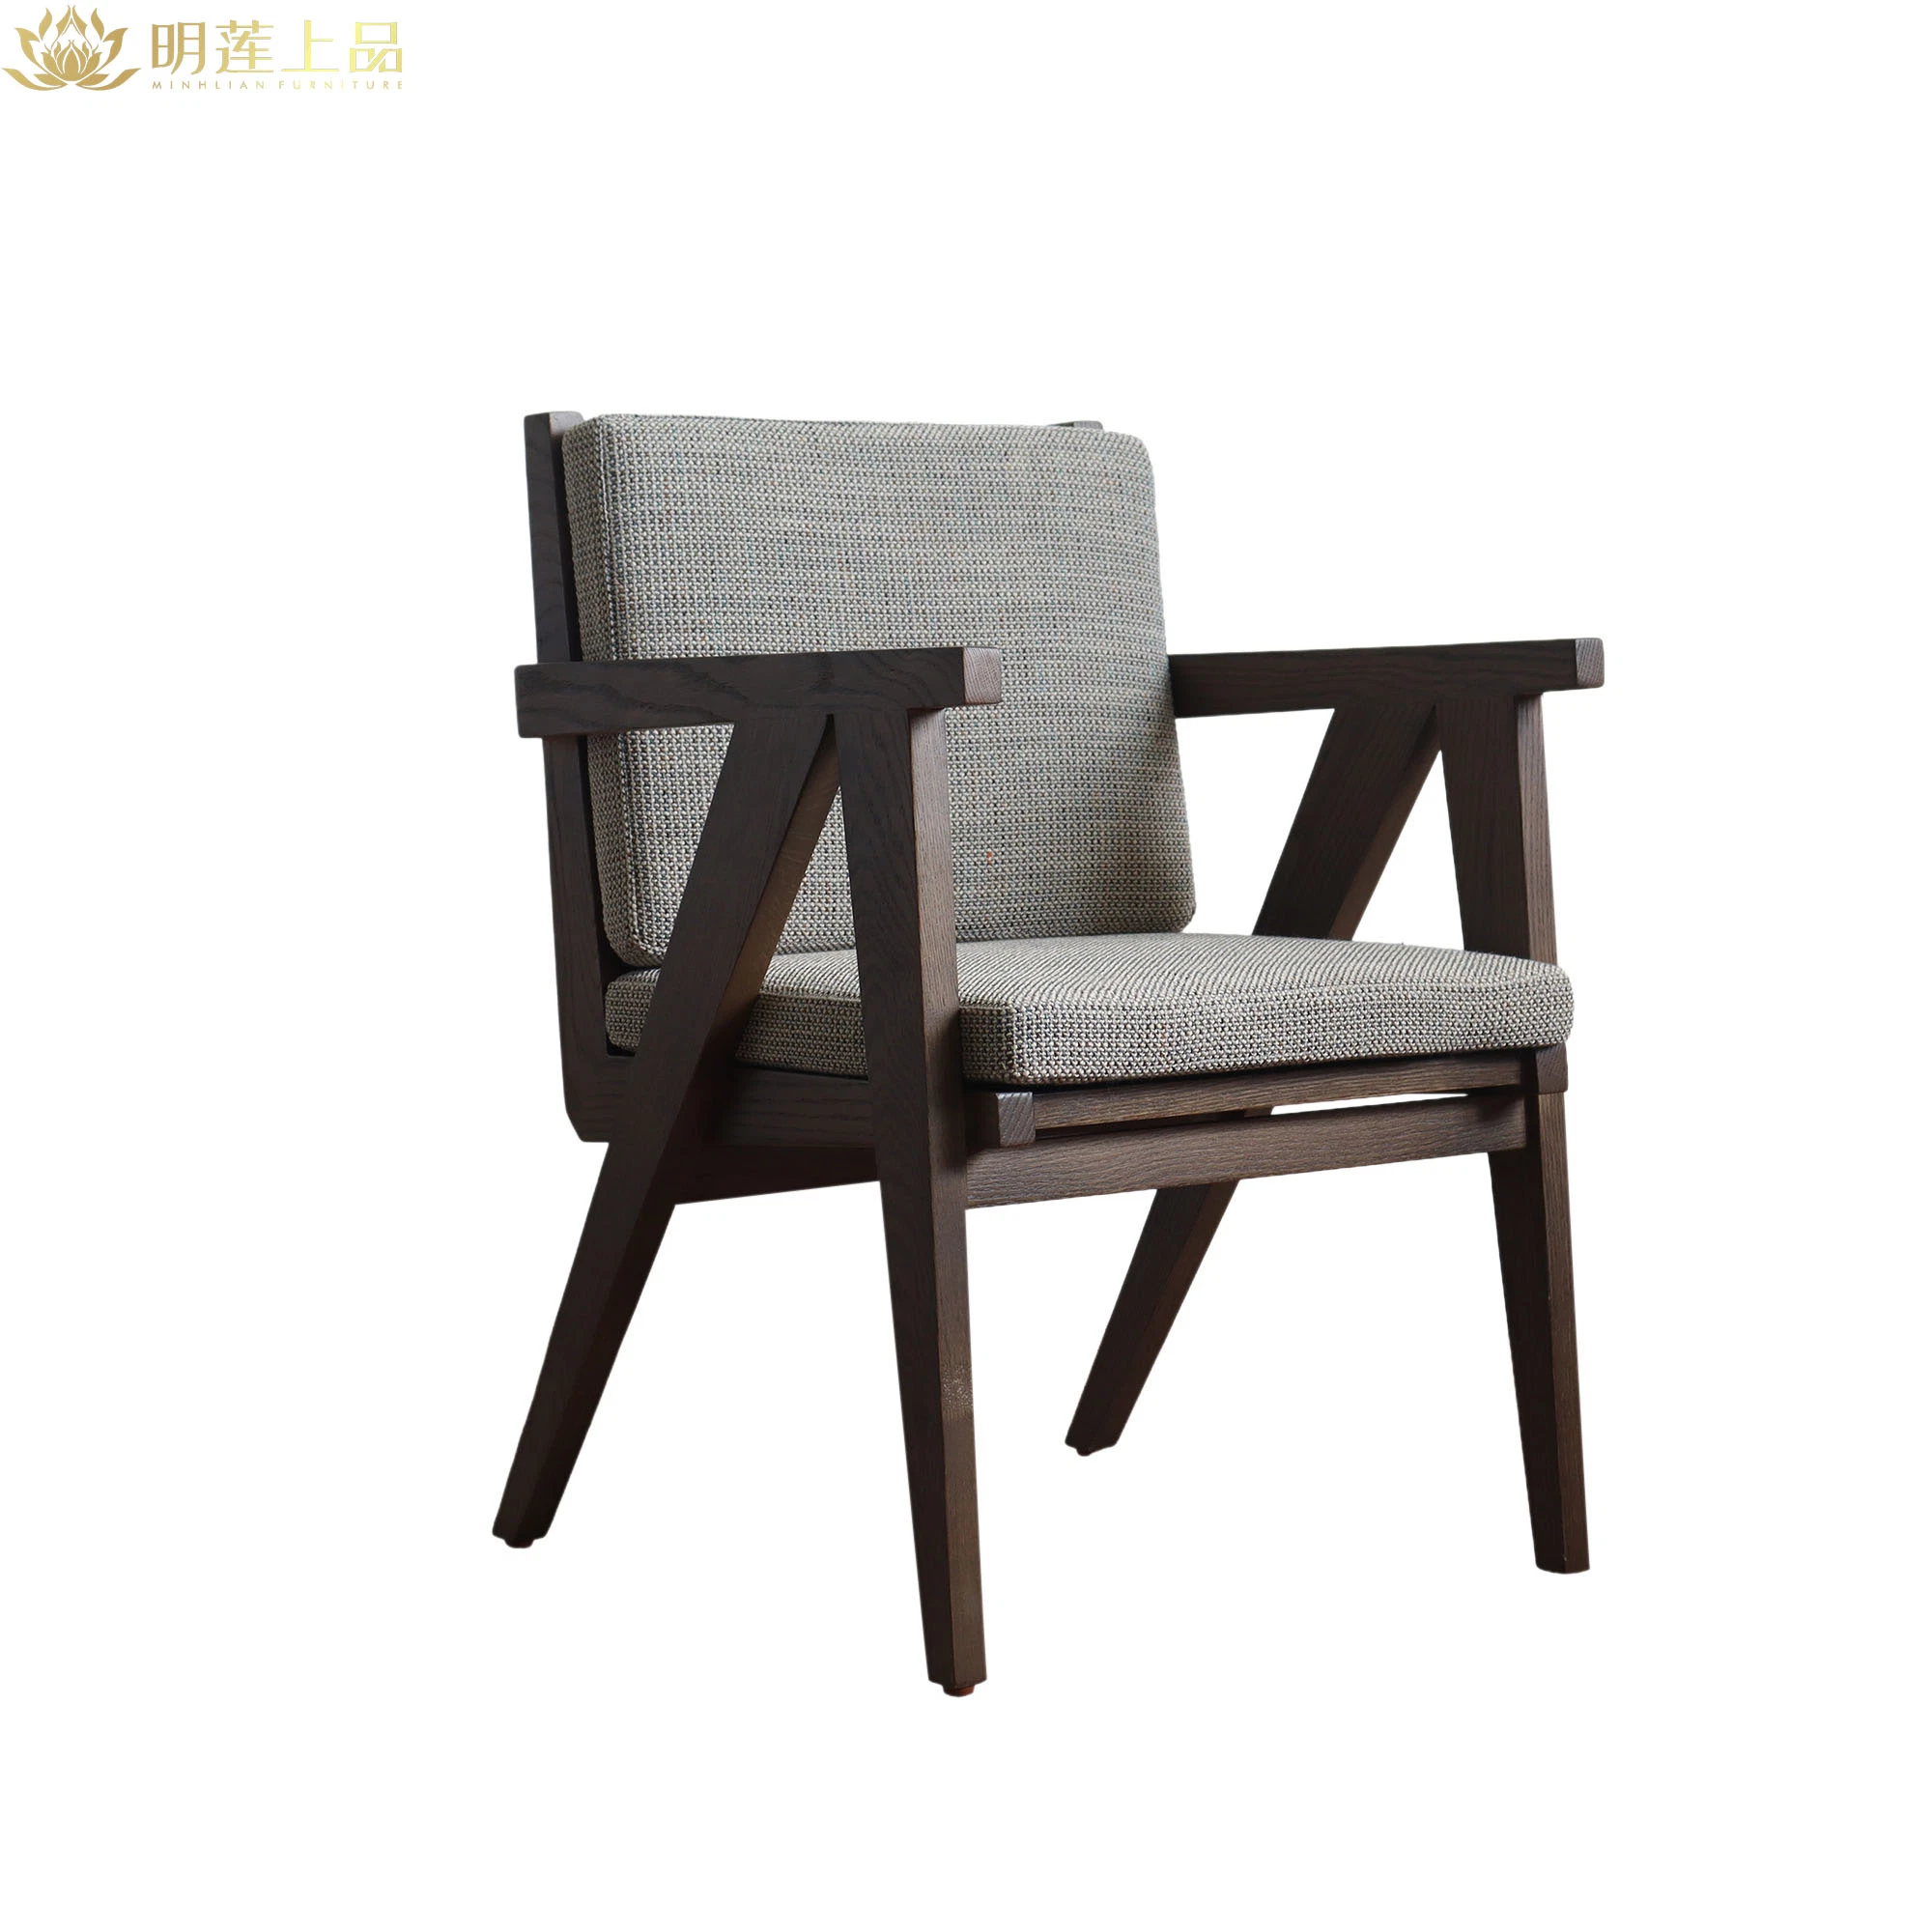 Fabric Upholstered Solid Wood Chair Hotel Furniture Living Room Furniture Restaurant Furniture Leisure Chair Dining Chair Armchair Wooden Chairs